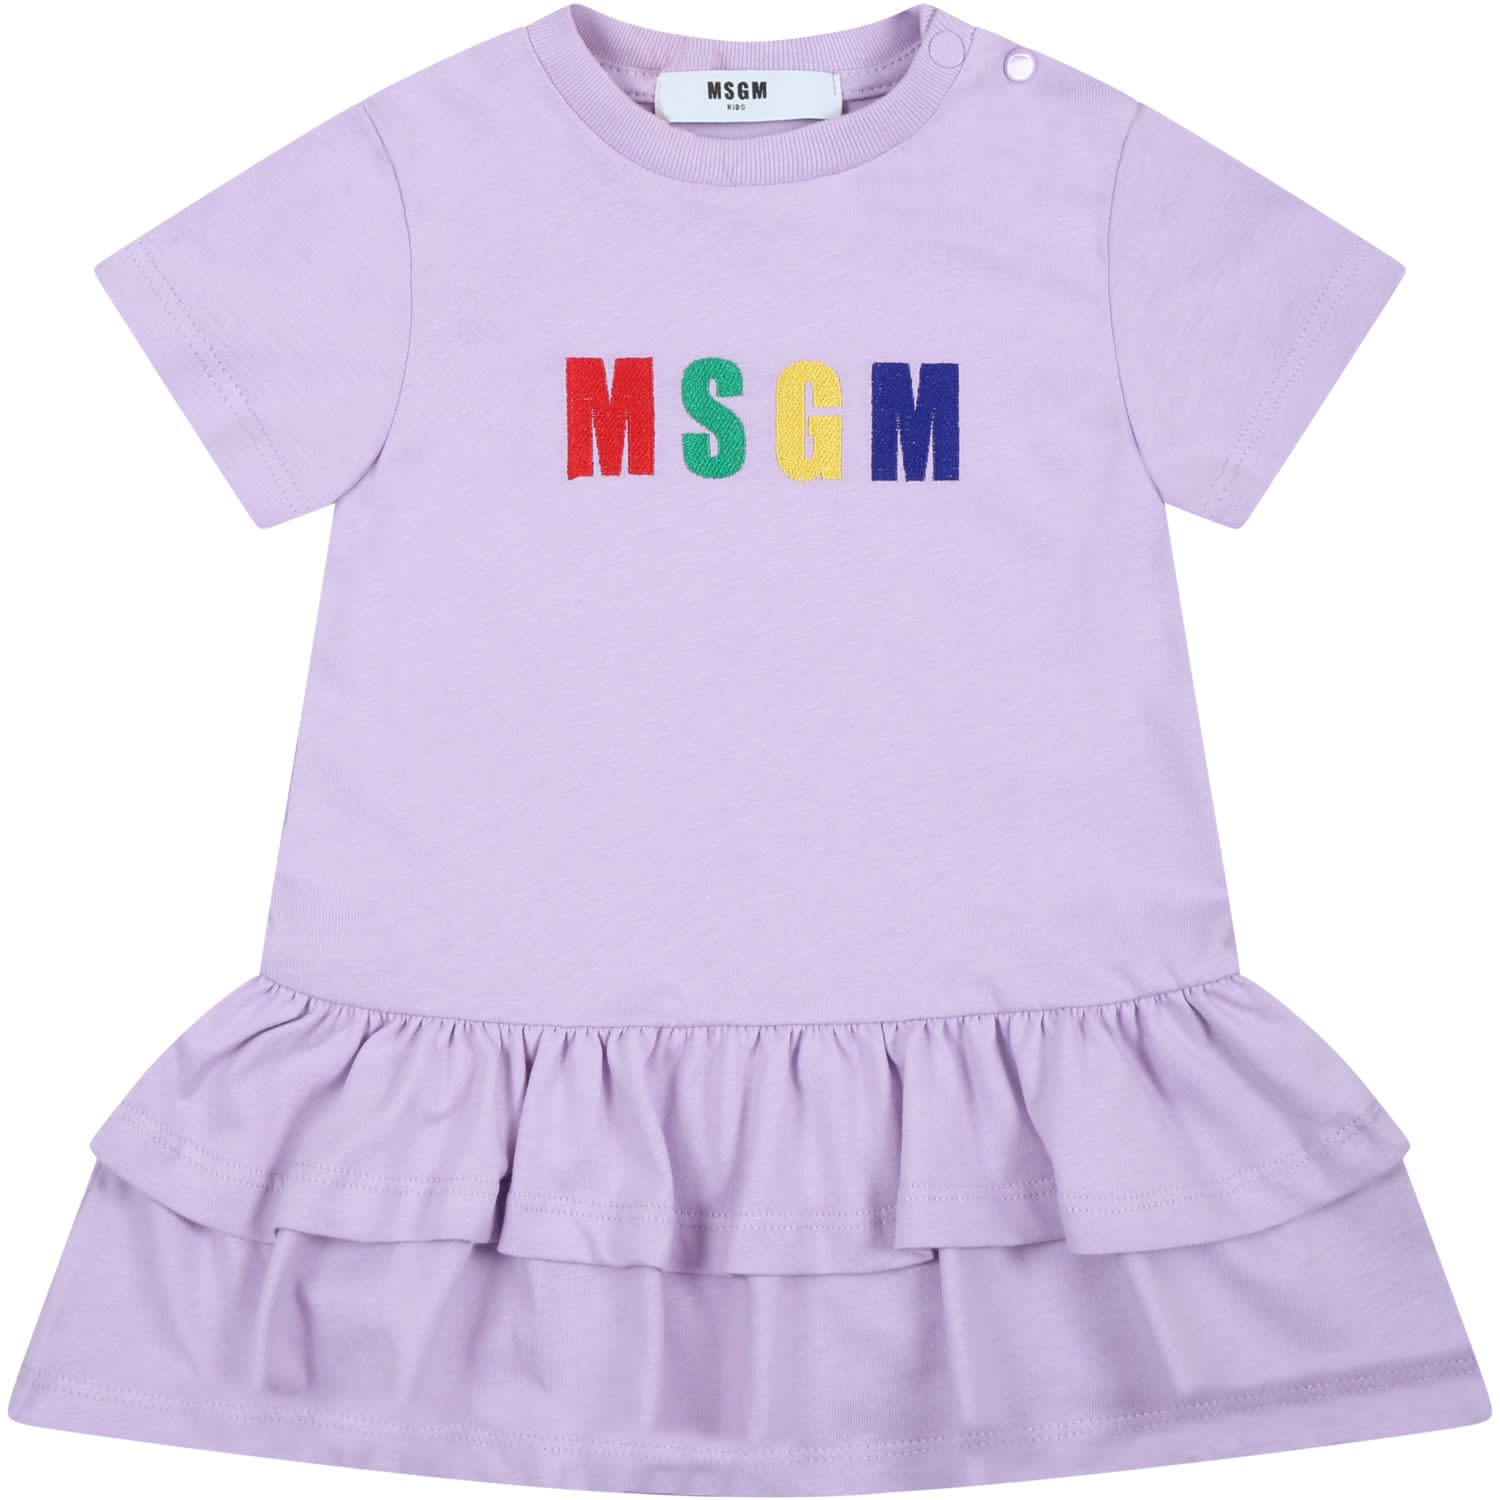 MSGM PURPLE DRESS FOR BABY GIRL WITH EMBROIDERED LOGO